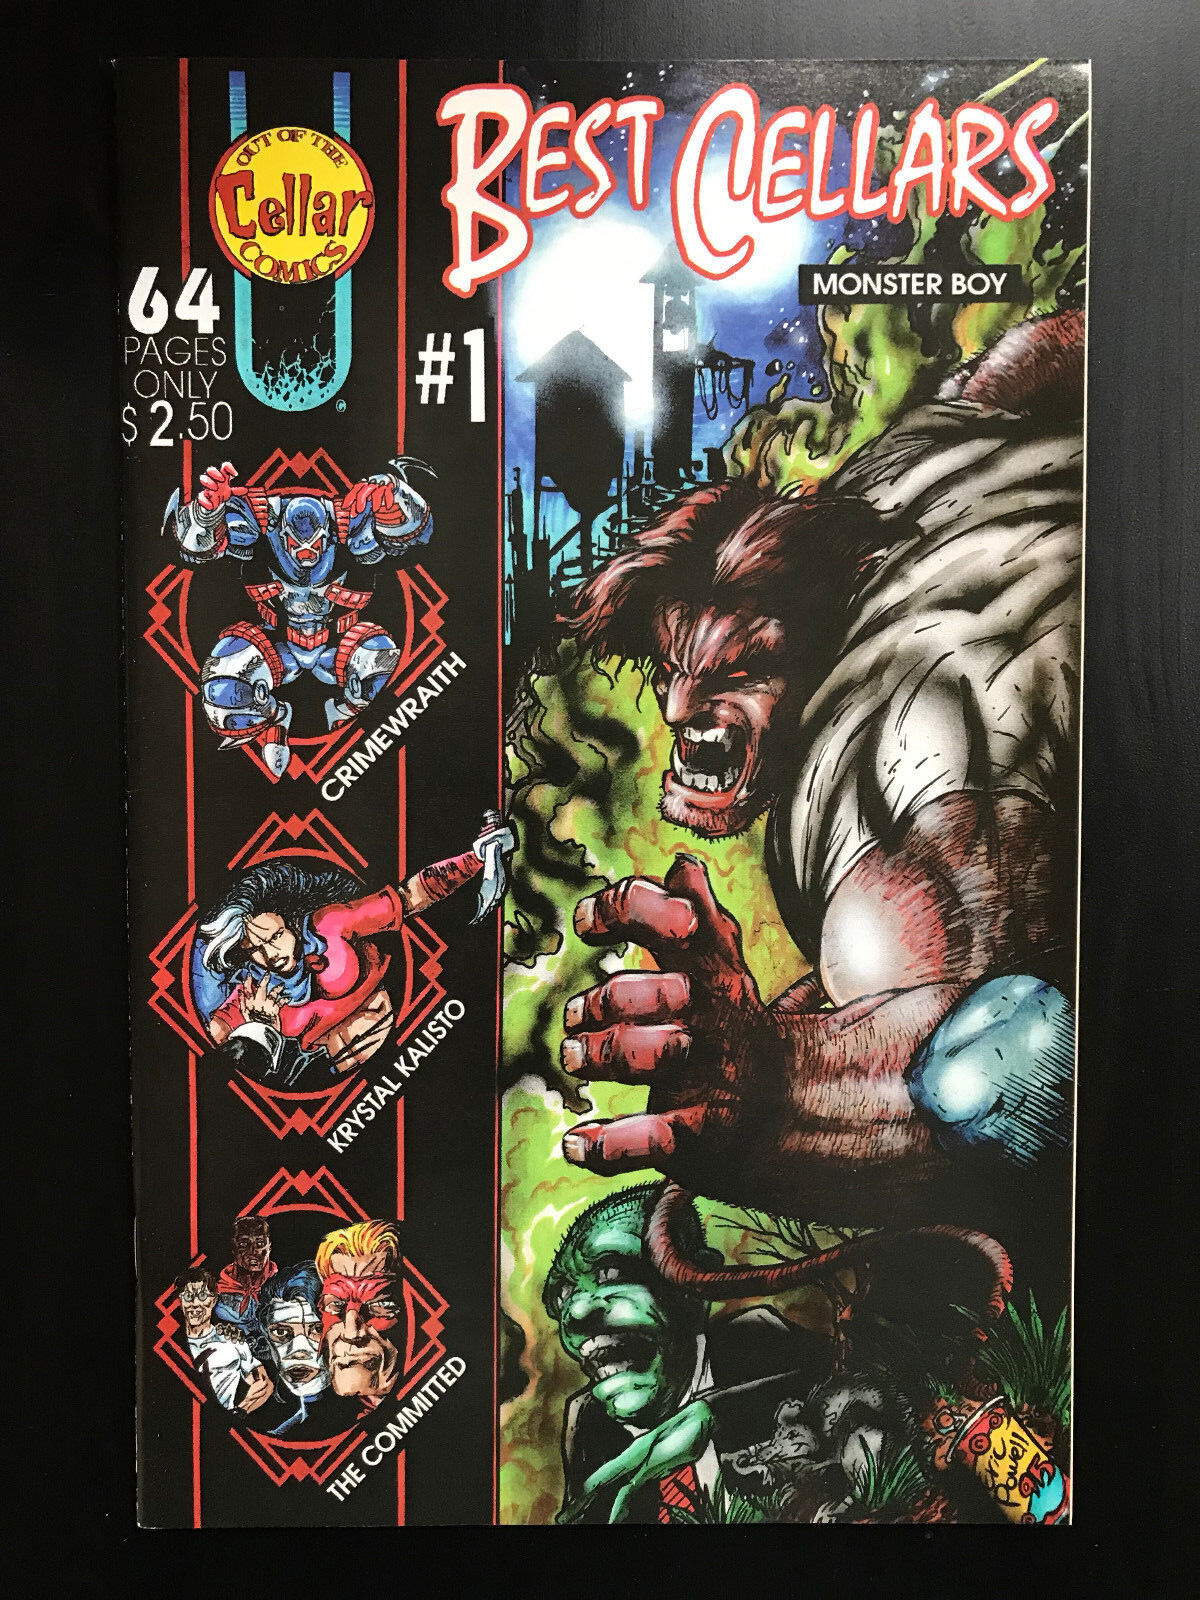 Best Cellars #1 First Printing 1995 Comic Book. Goon NM Condition